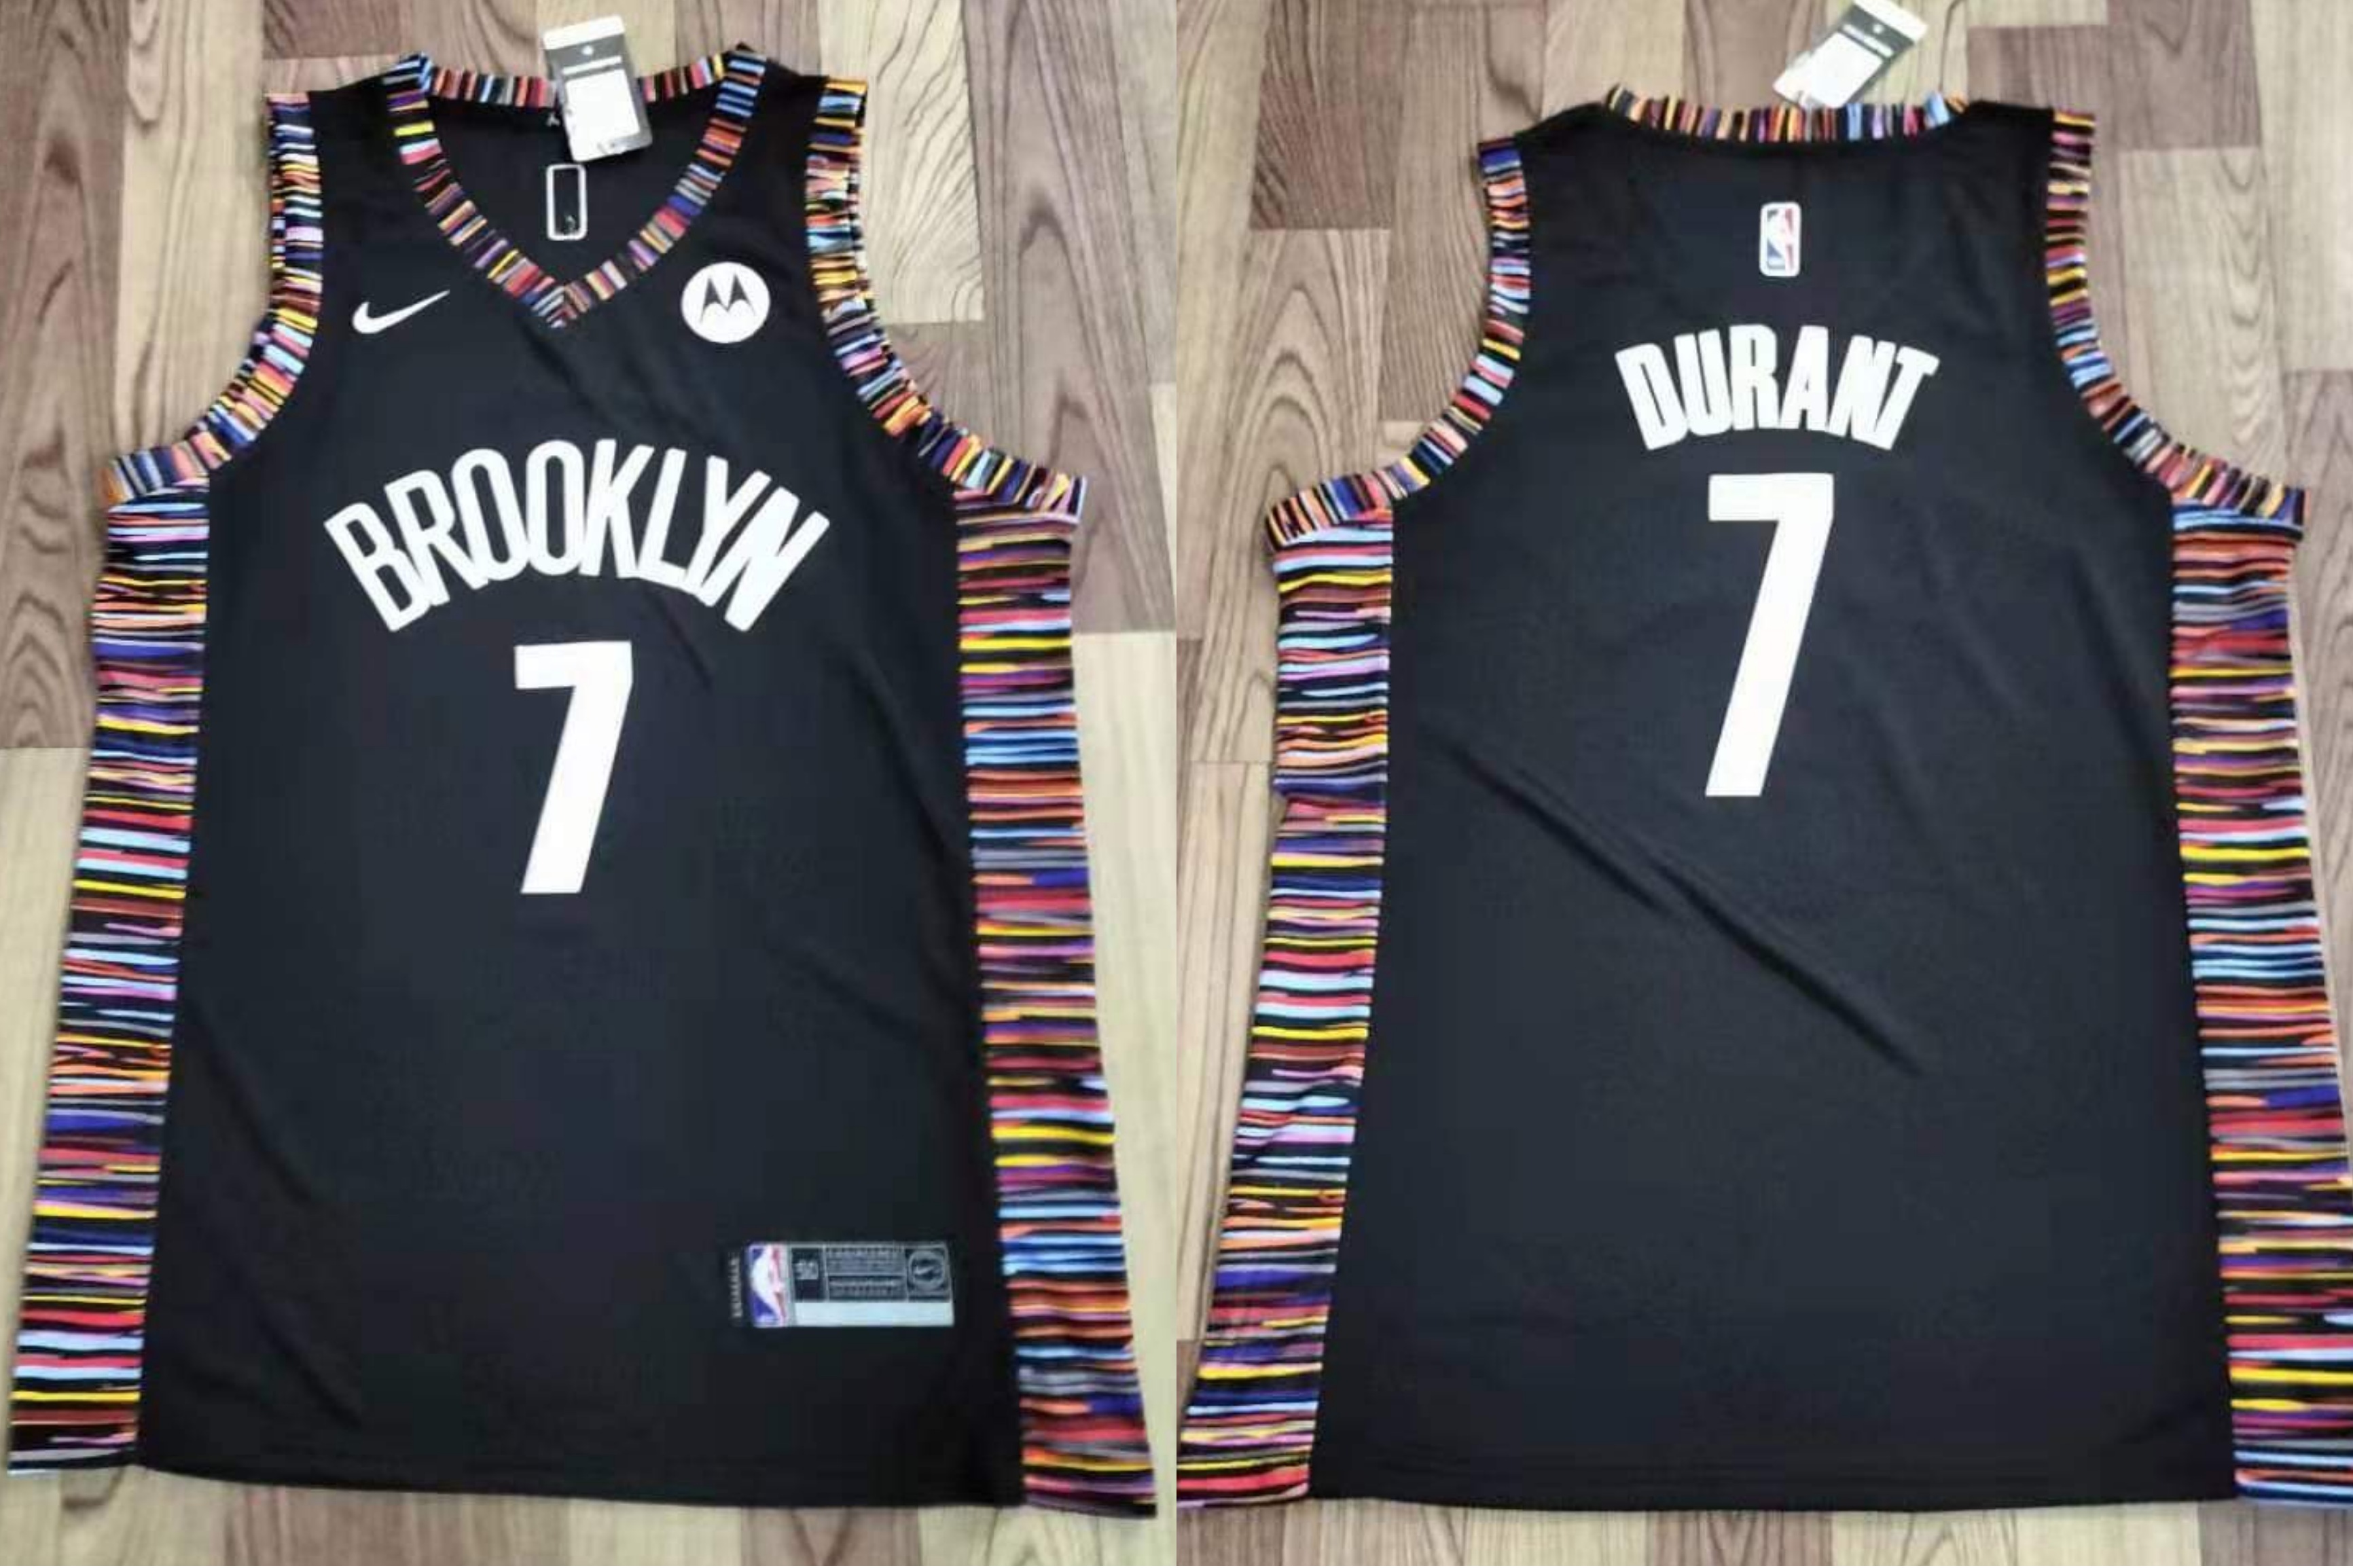 Kevin Durant Brooklyn Nets 2019 City Edition Jersey